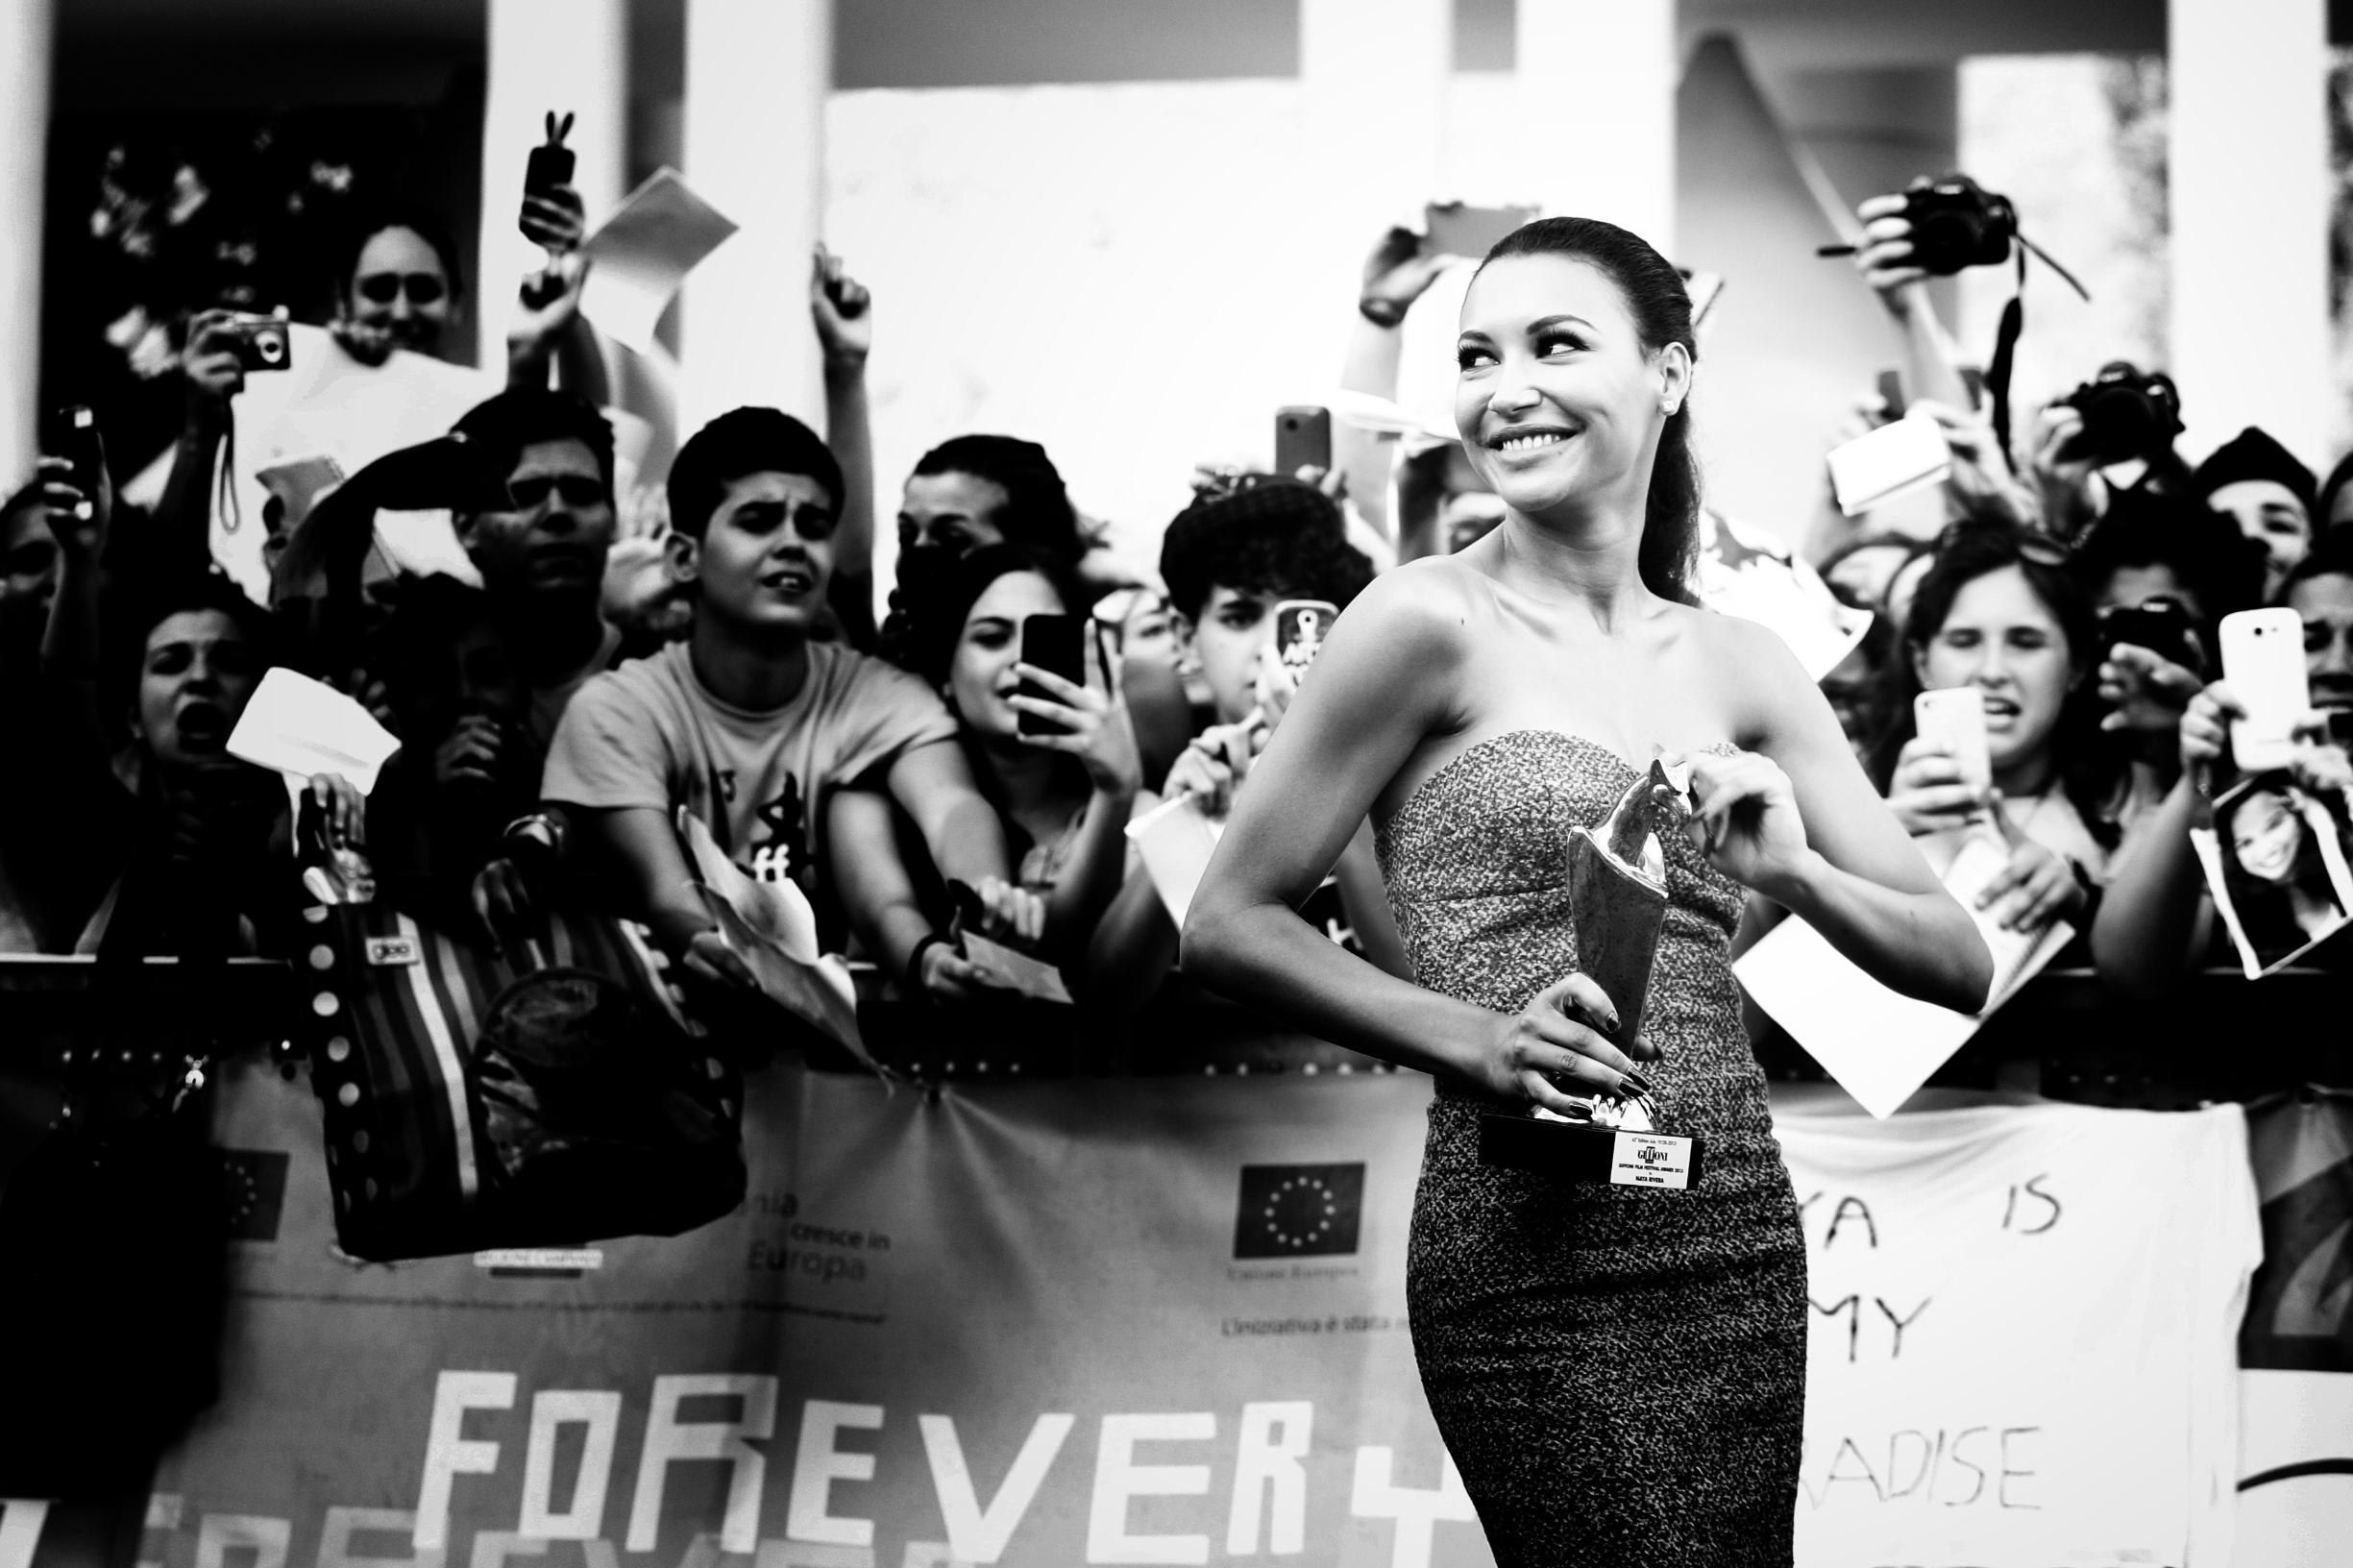 GIFFONI VALLE PIANA, ITALY - JULY 24:  (EDITORS NOTE: This image was processed using digital filters) Naya Rivera attends 2013 Giffoni Film Festival blue carpet on July 24, 2013 in Giffoni Valle Piana, Italy.  (Photo by Vittorio Zunino Celotto/Getty Images)